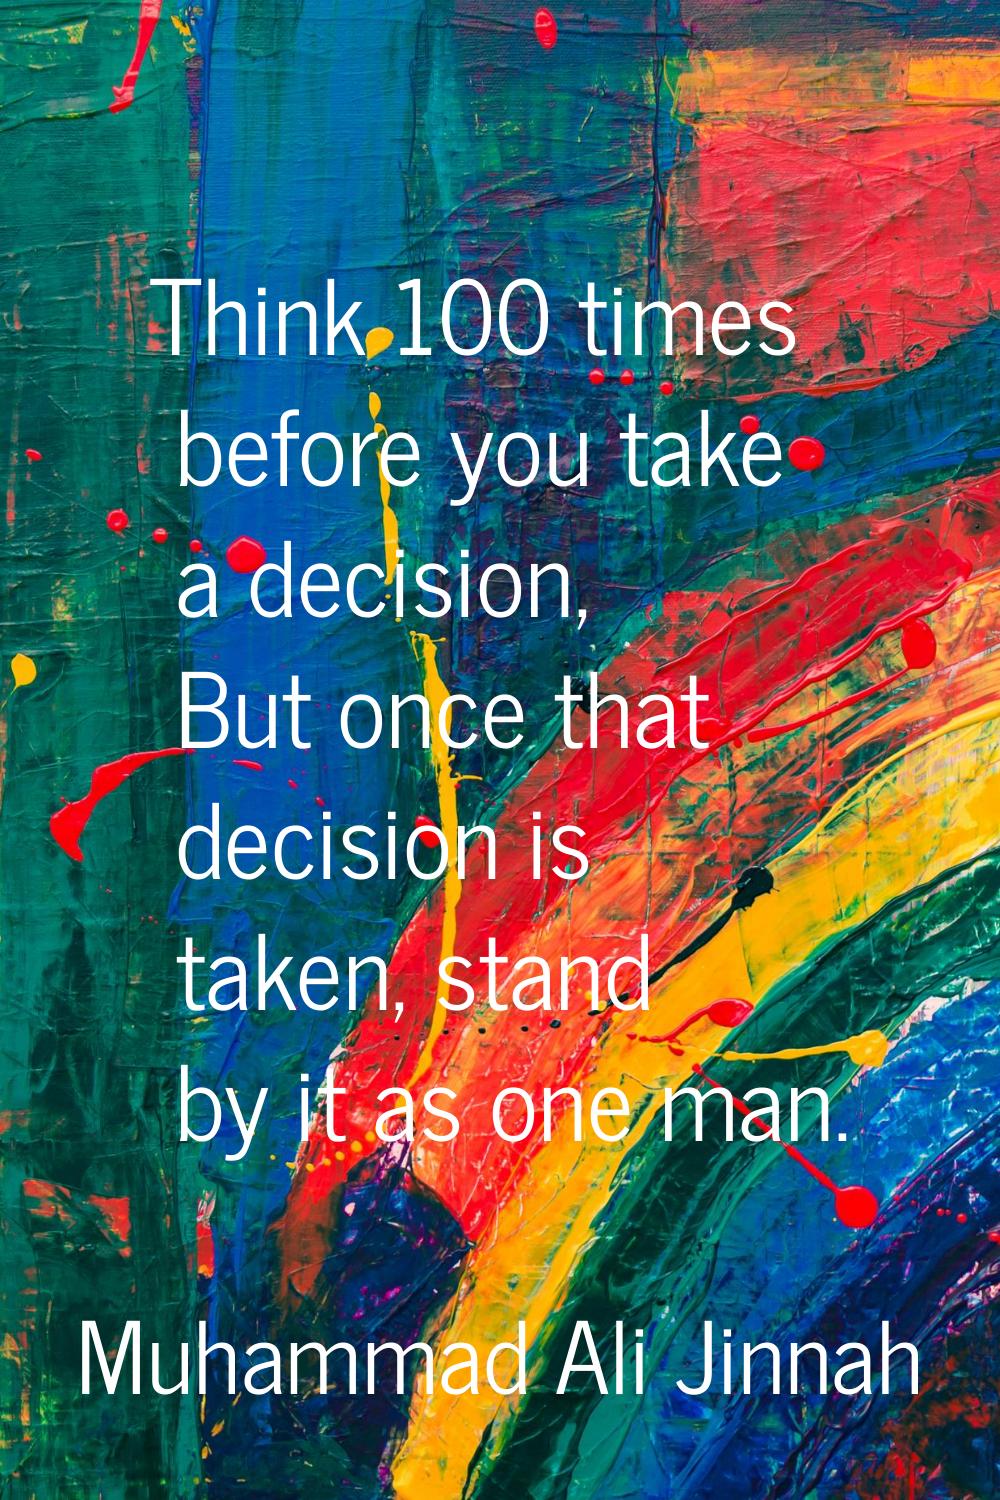 Think 100 times before you take a decision, But once that decision is taken, stand by it as one man